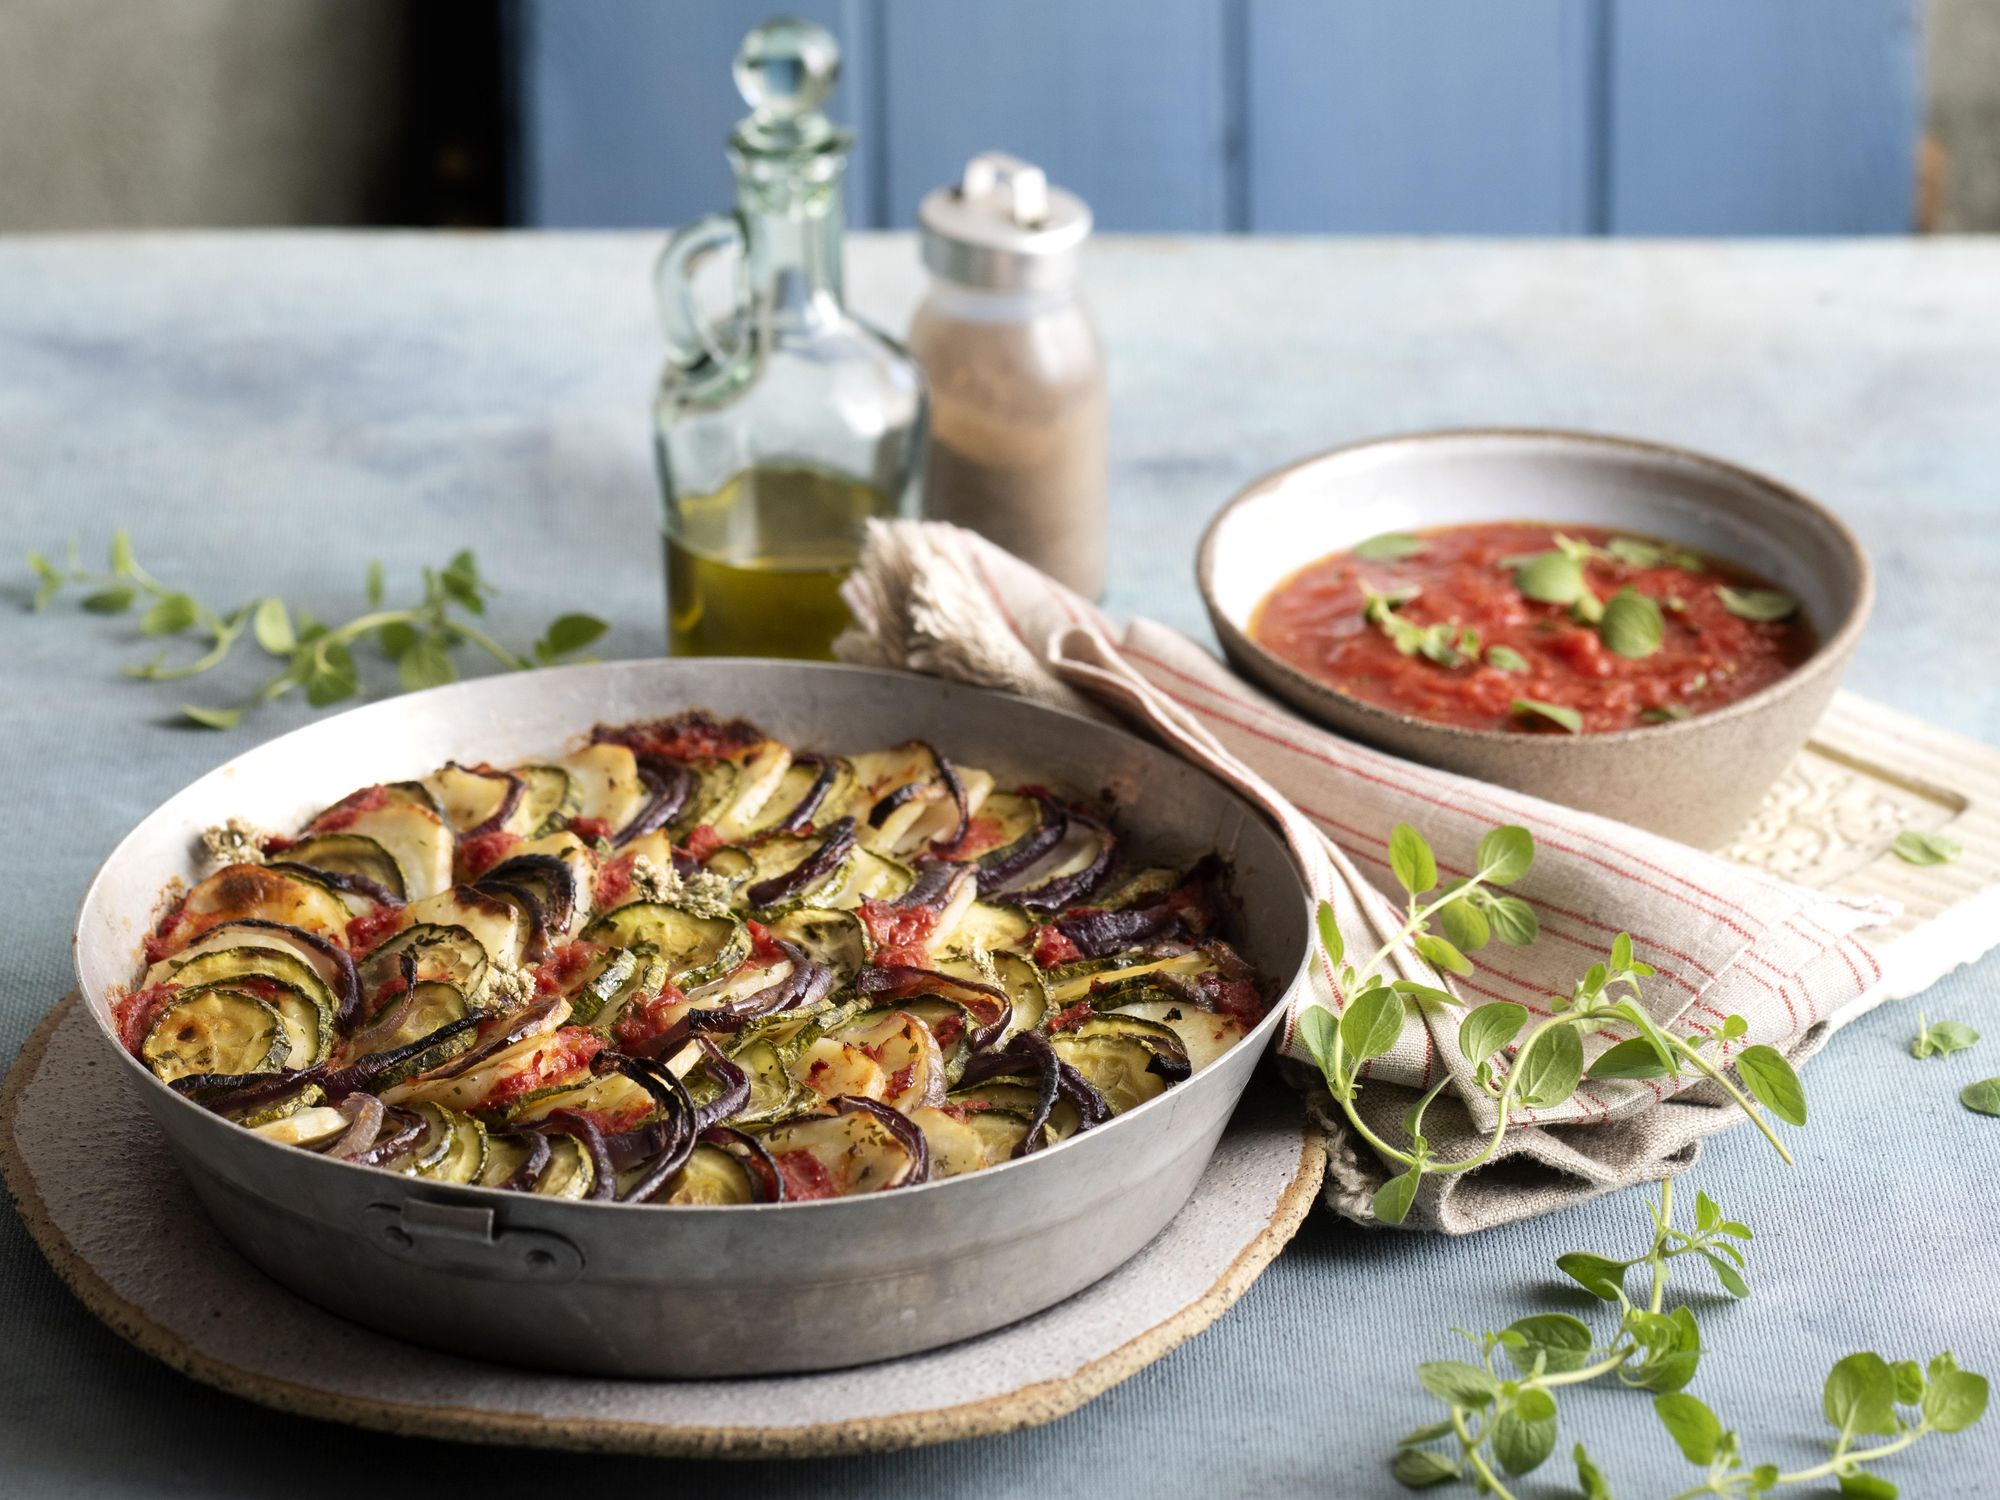 Baked zucchini/courgettes, potatoes, tomatoes and red onion